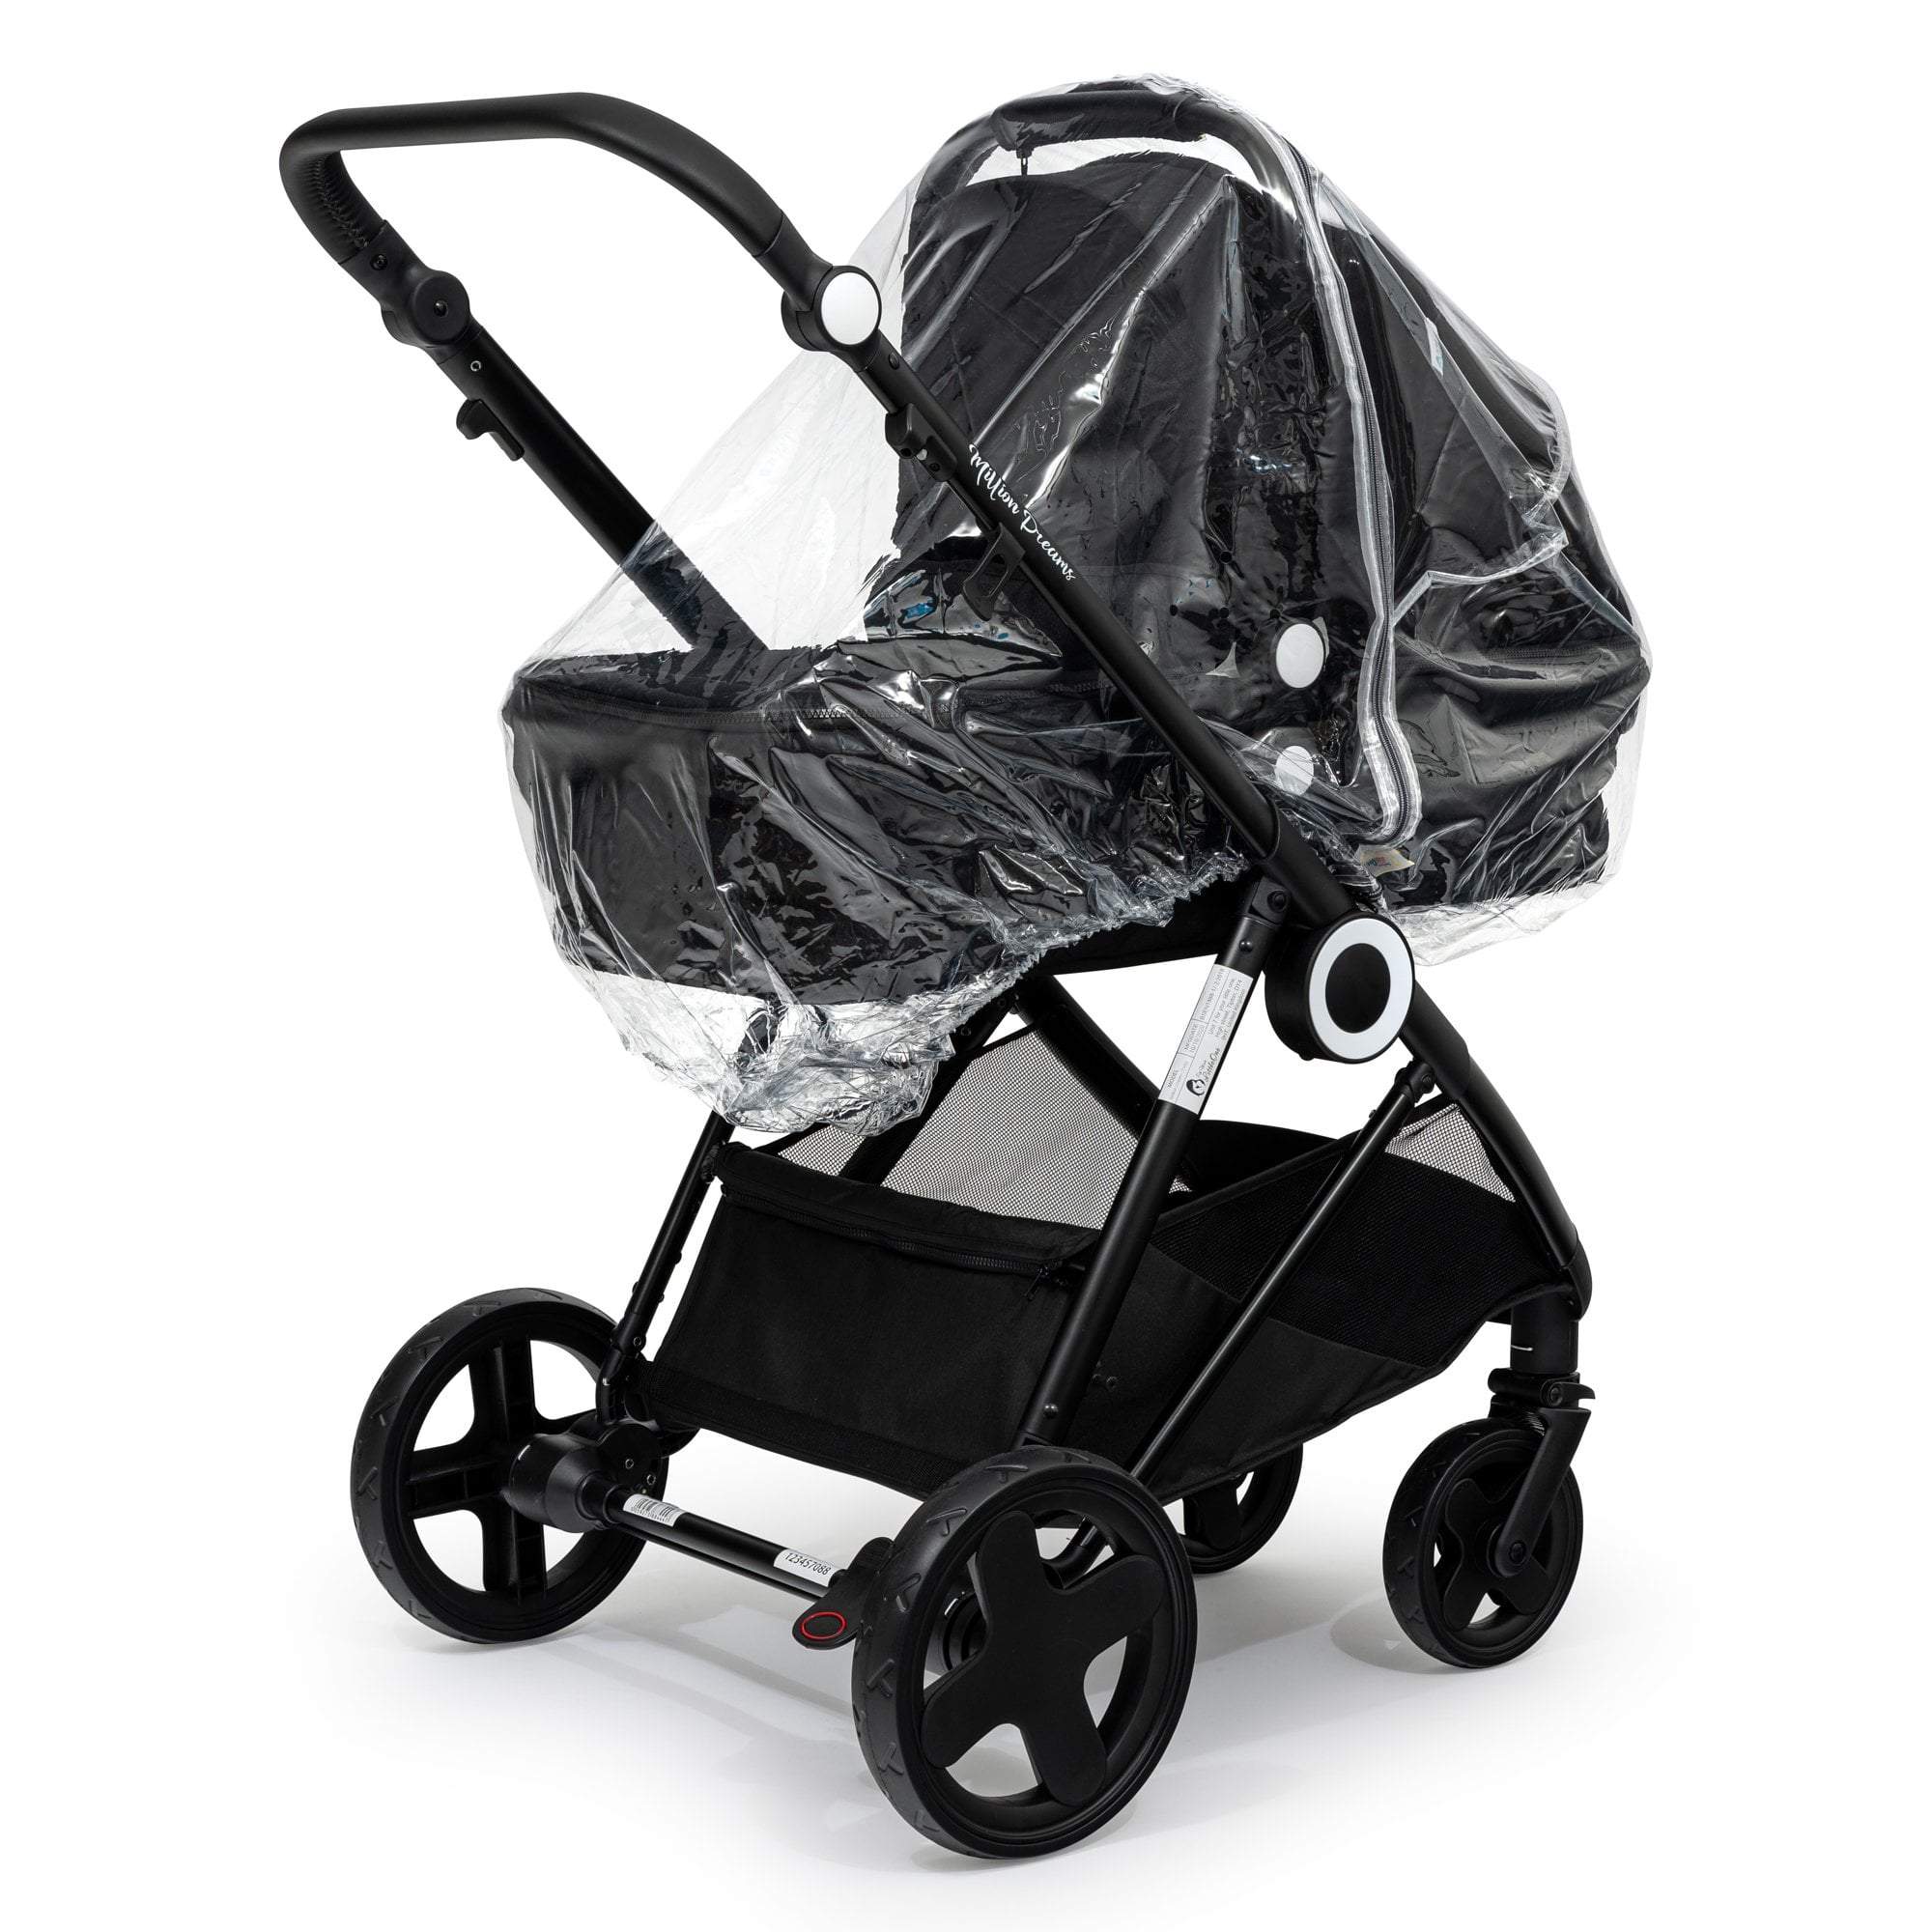 Carrycot Raincover Compatible With Brio - Fits All Models - For Your Little One